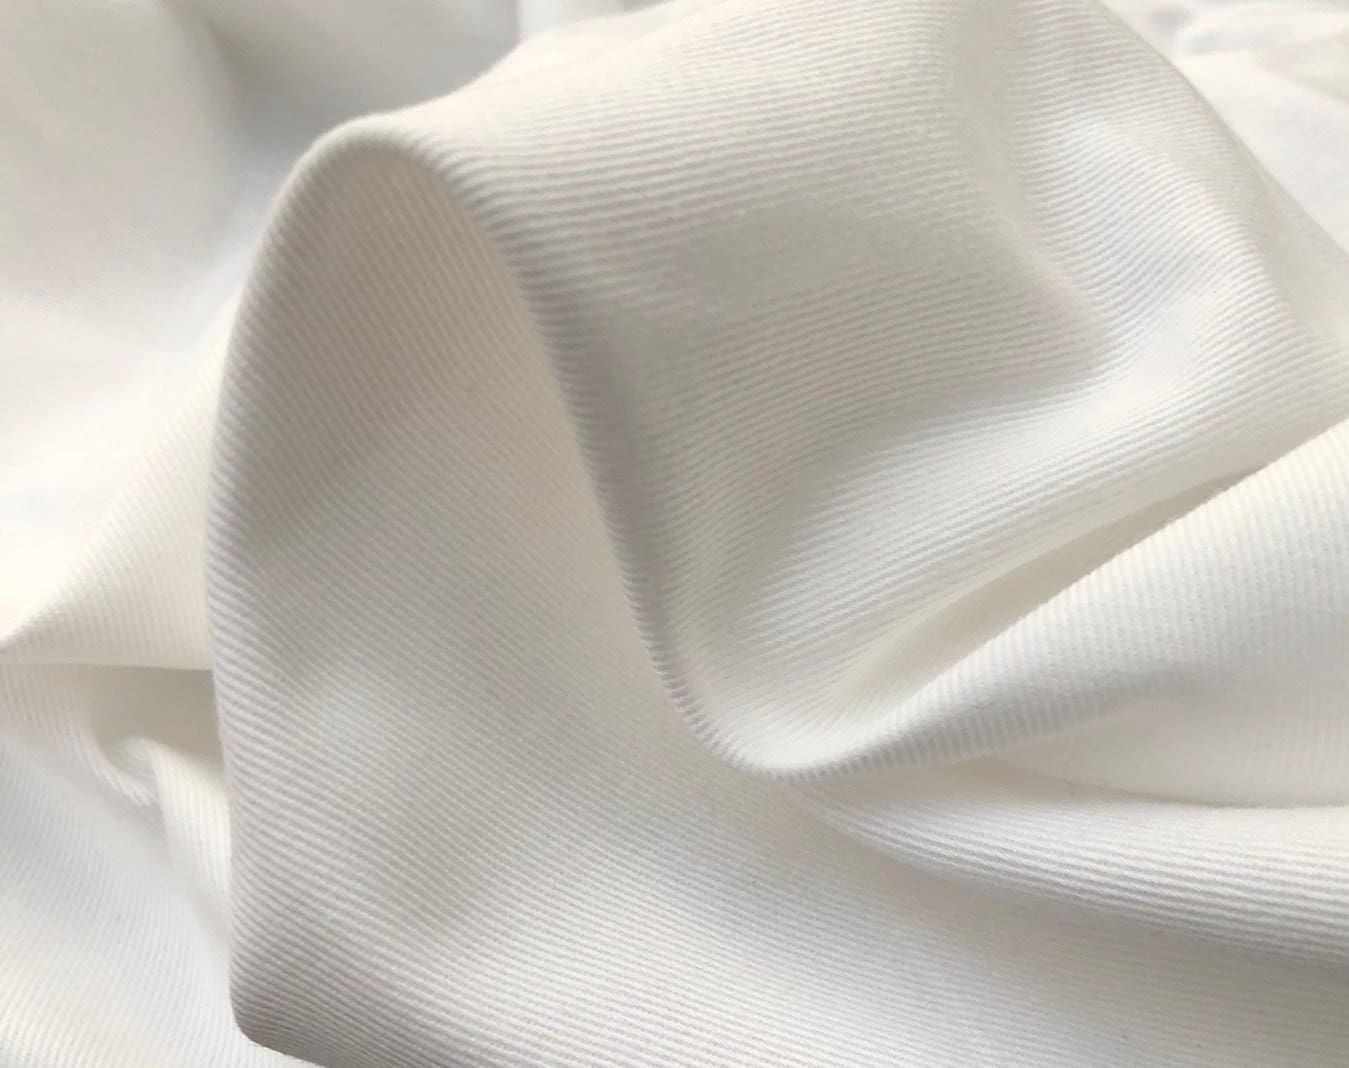 Cotton Twill Fabric by the Yard, 100% White Cotton Twill Embroidery Fabric,  White Embroidery Cloth 